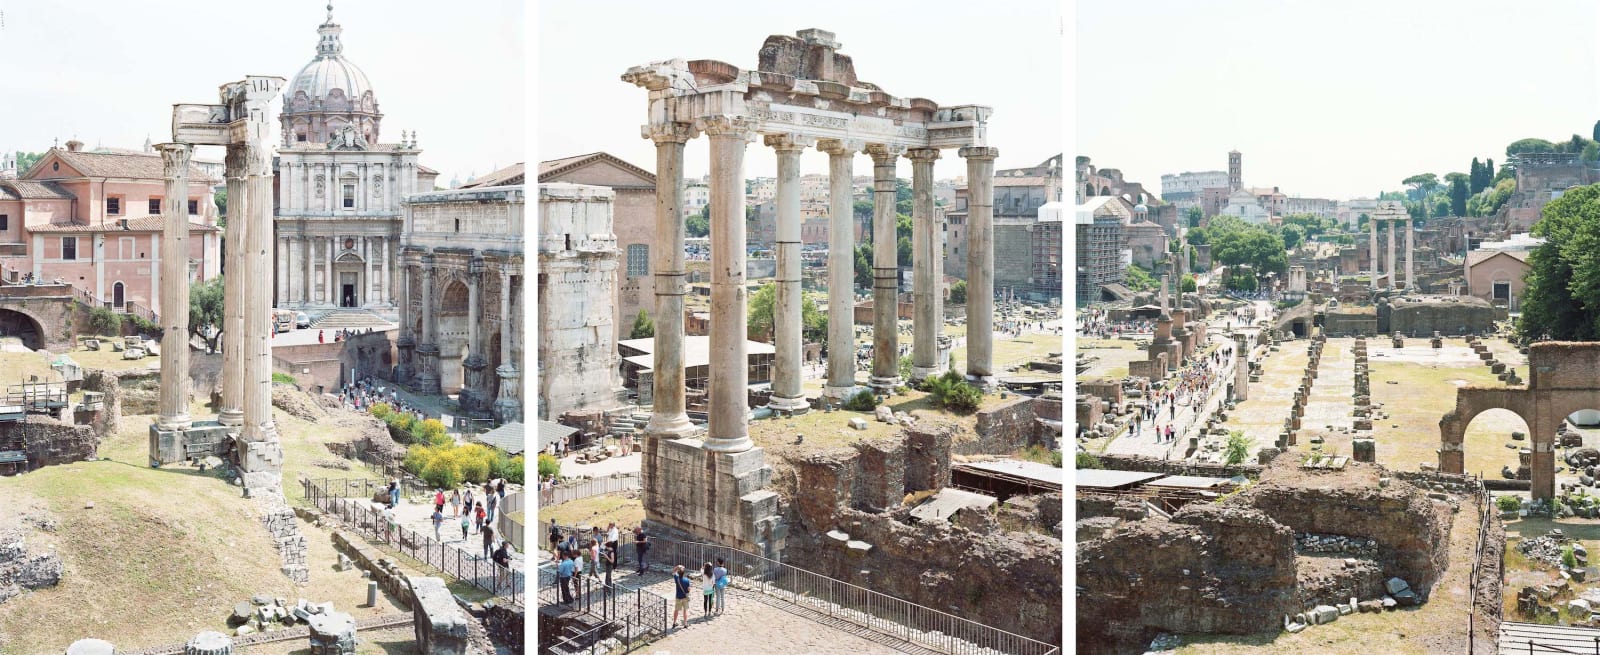 Triptych of the Roman Forum, Italy by Massimo VItali